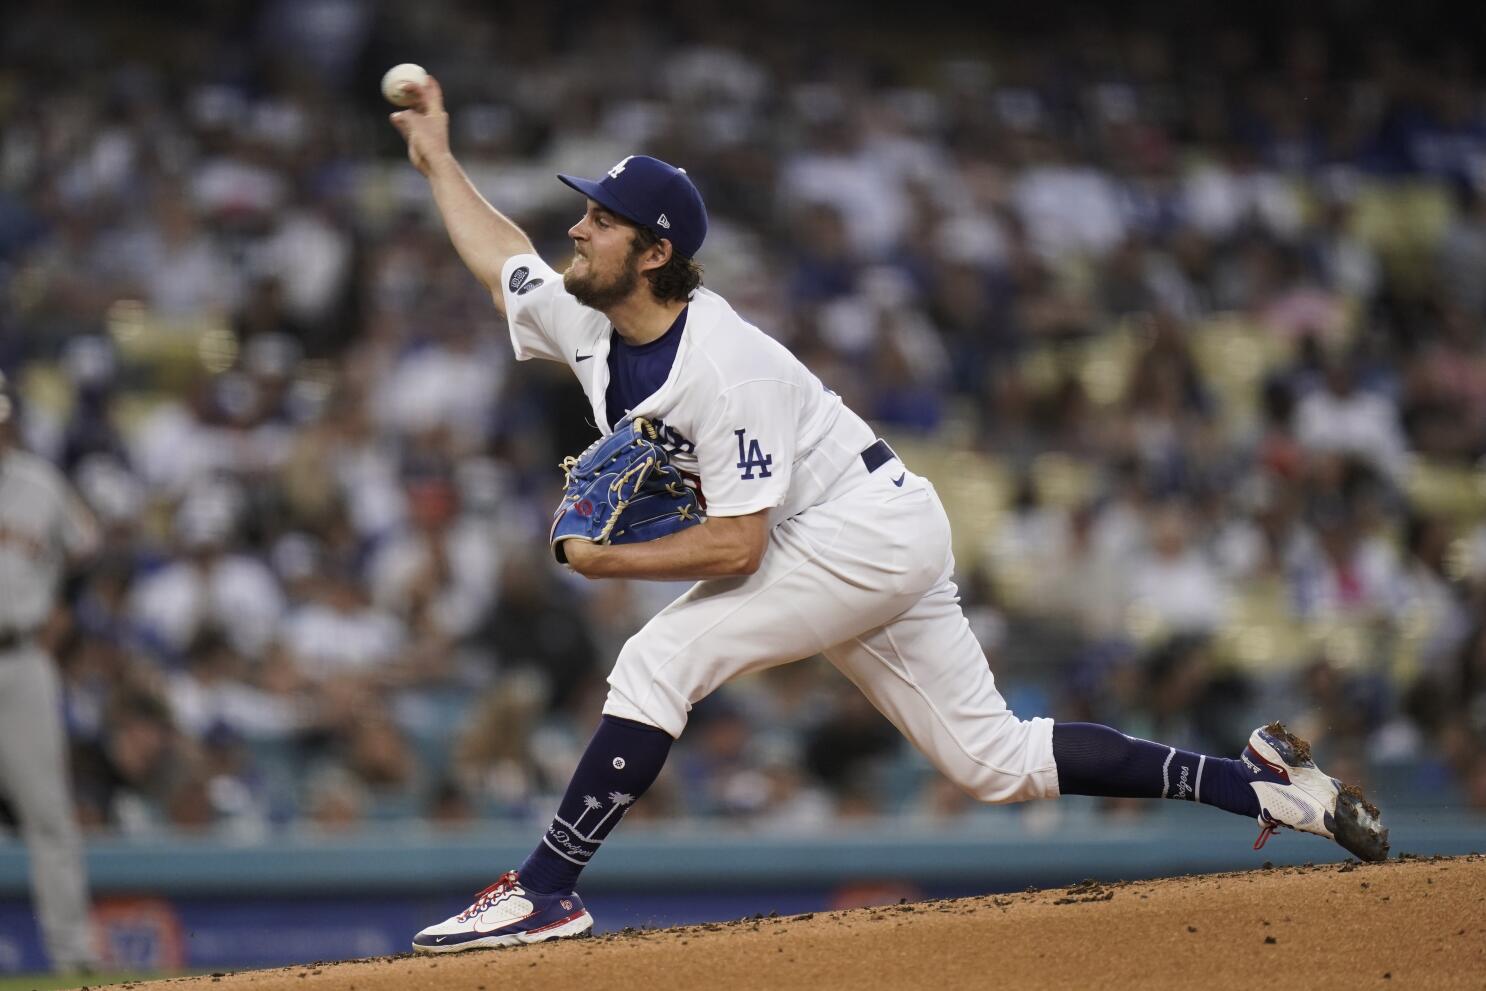 Dodgers cancel Bauer's bobblehead night, pull merchandise - The